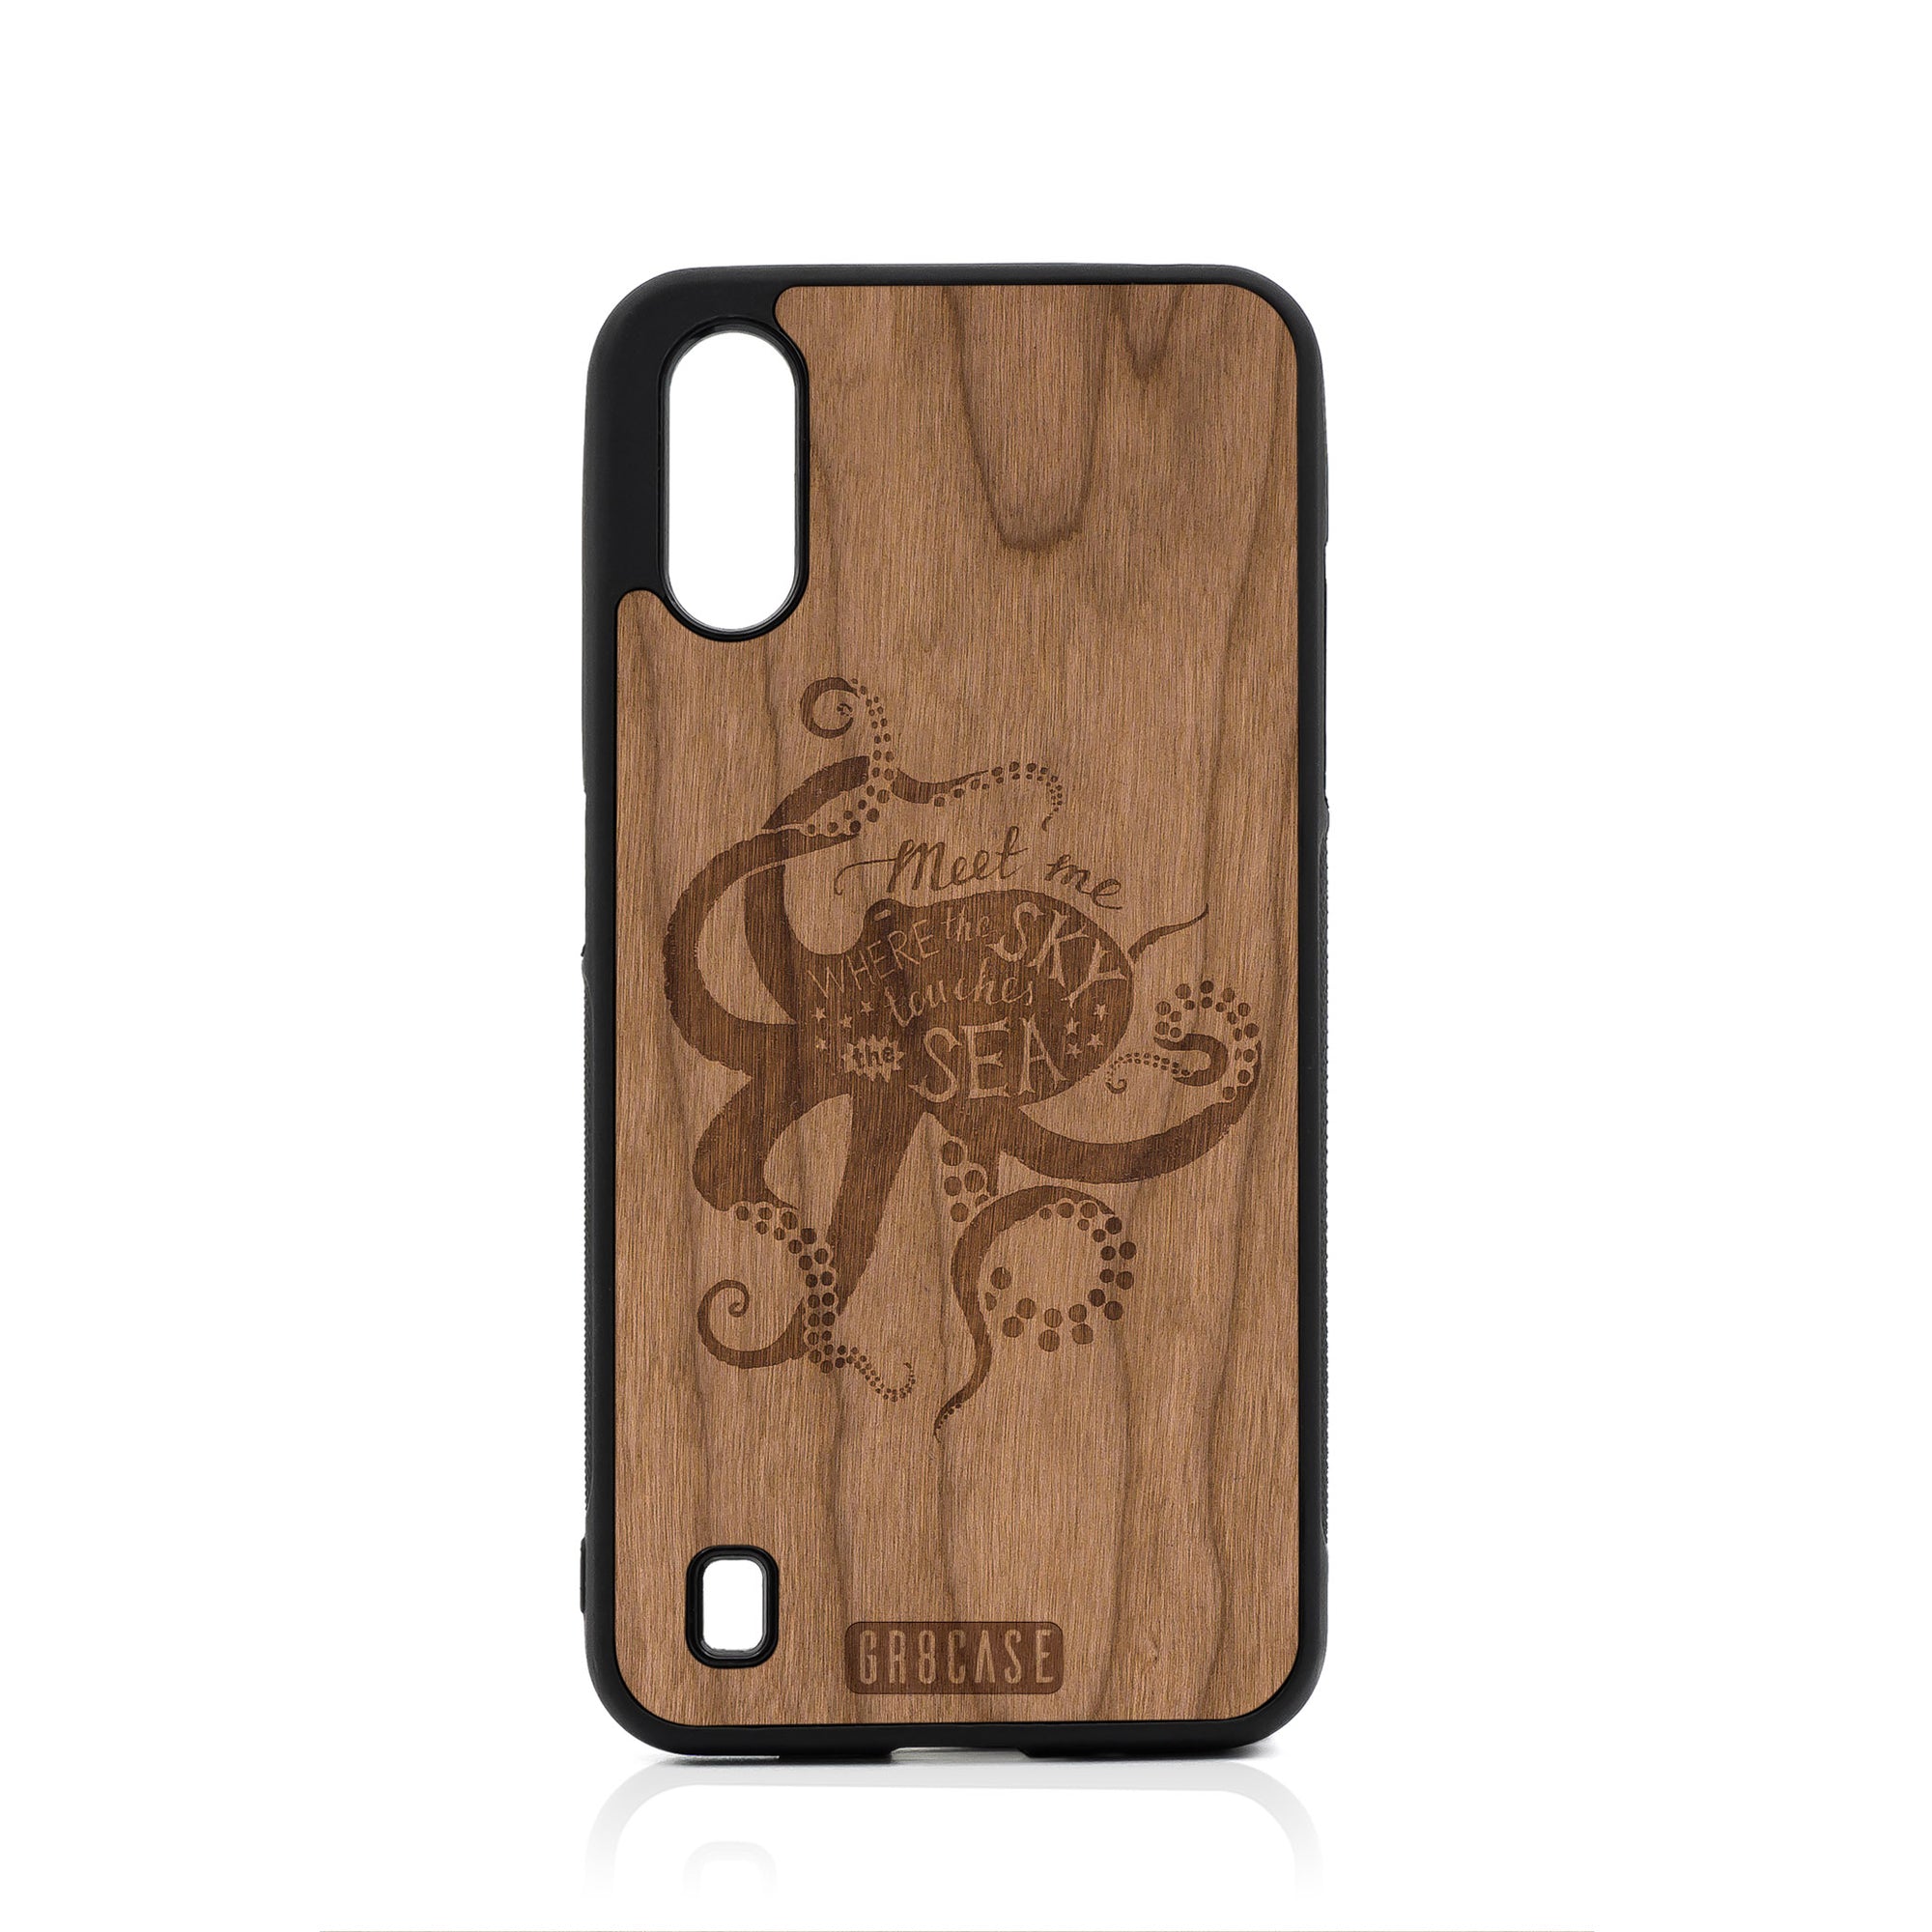 Meet Me Where The Sky Touches The Sea (Octopus) Design Wood Case For Samsung Galaxy A01